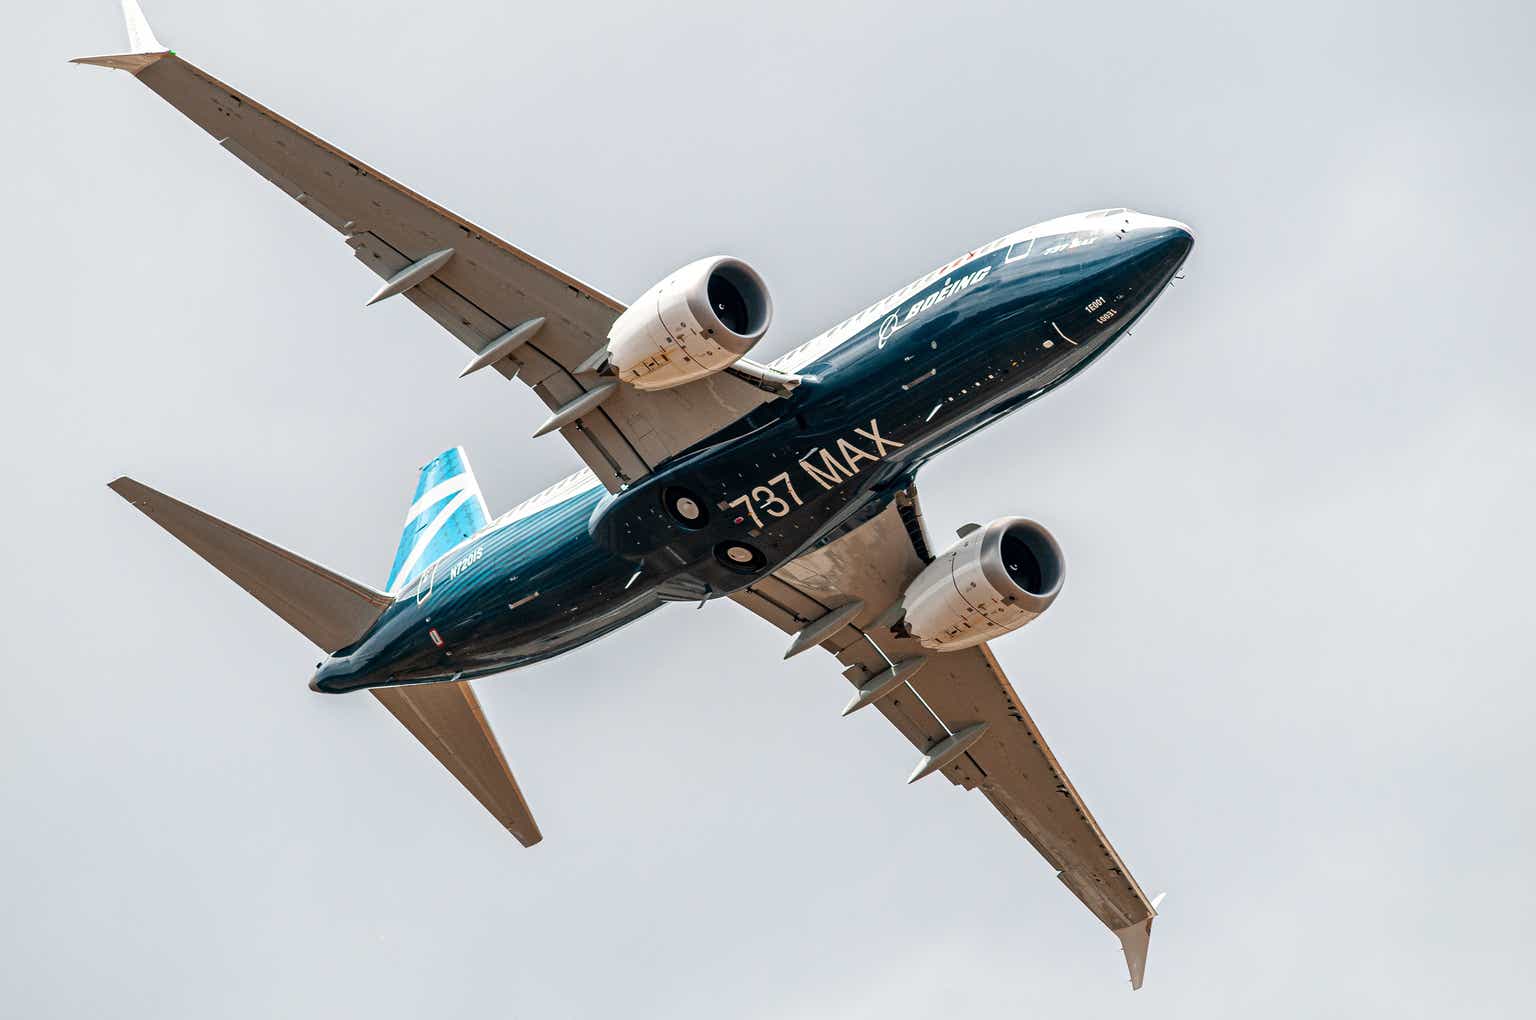 Boeing Stock Tumbles: A New Boeing 737 MAX Crisis? (NYSE:BA)